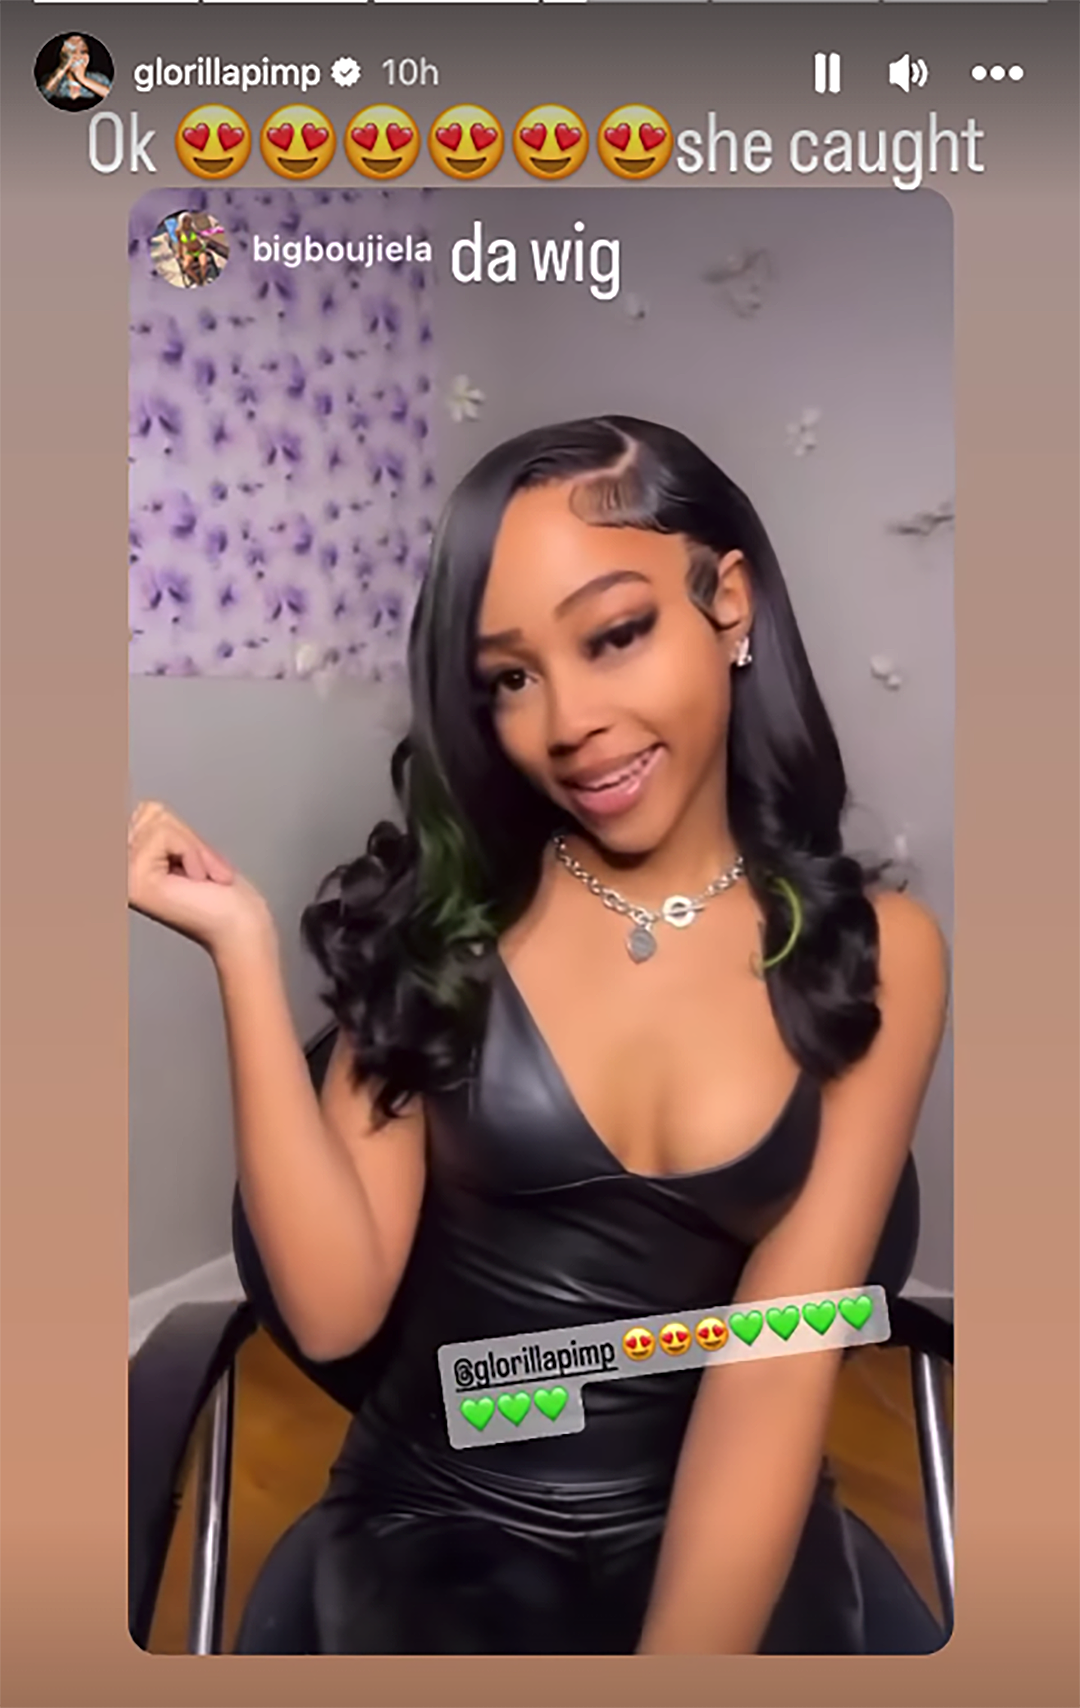 GloRilla Fan Who Caught the Rapper's Wig at Concert Goes Viral After Wearing It Herself, Glo Responds - Watch